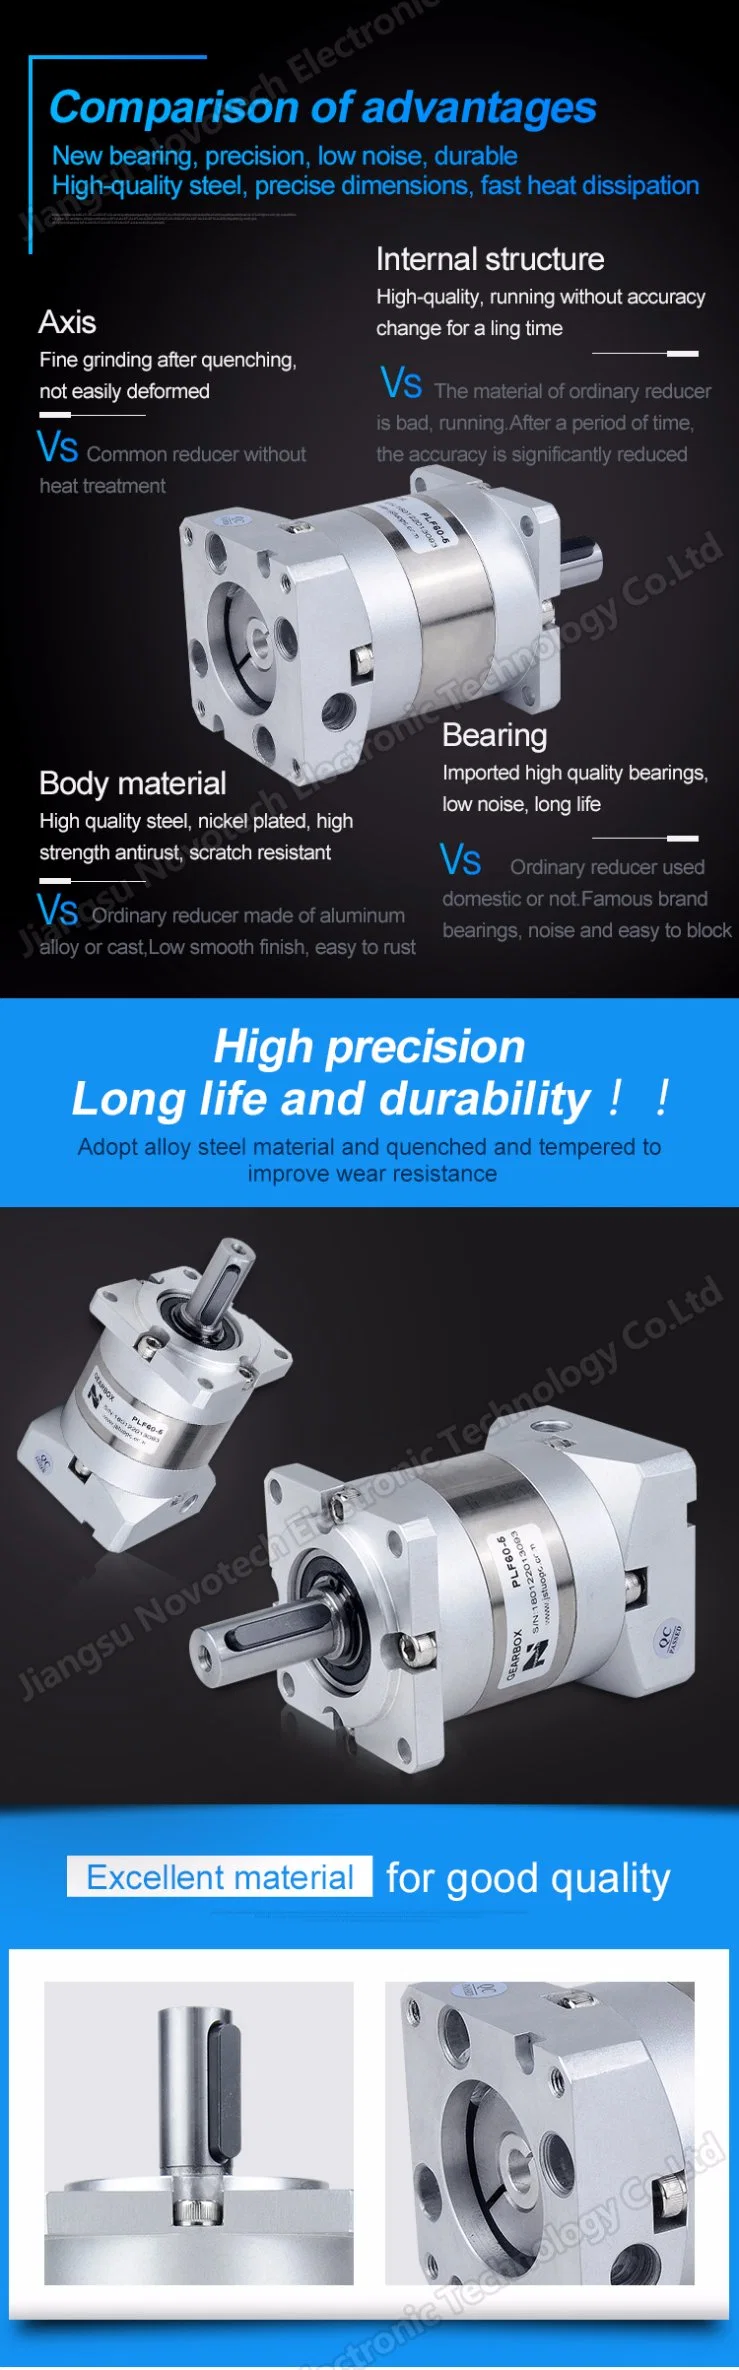 Servo Motor/Stepper Motor Planetary Gearbox/ Reducer High Precision Accuracy with Low Backlash/Helical Bevel Gearbox Big Torque Reduce Speed